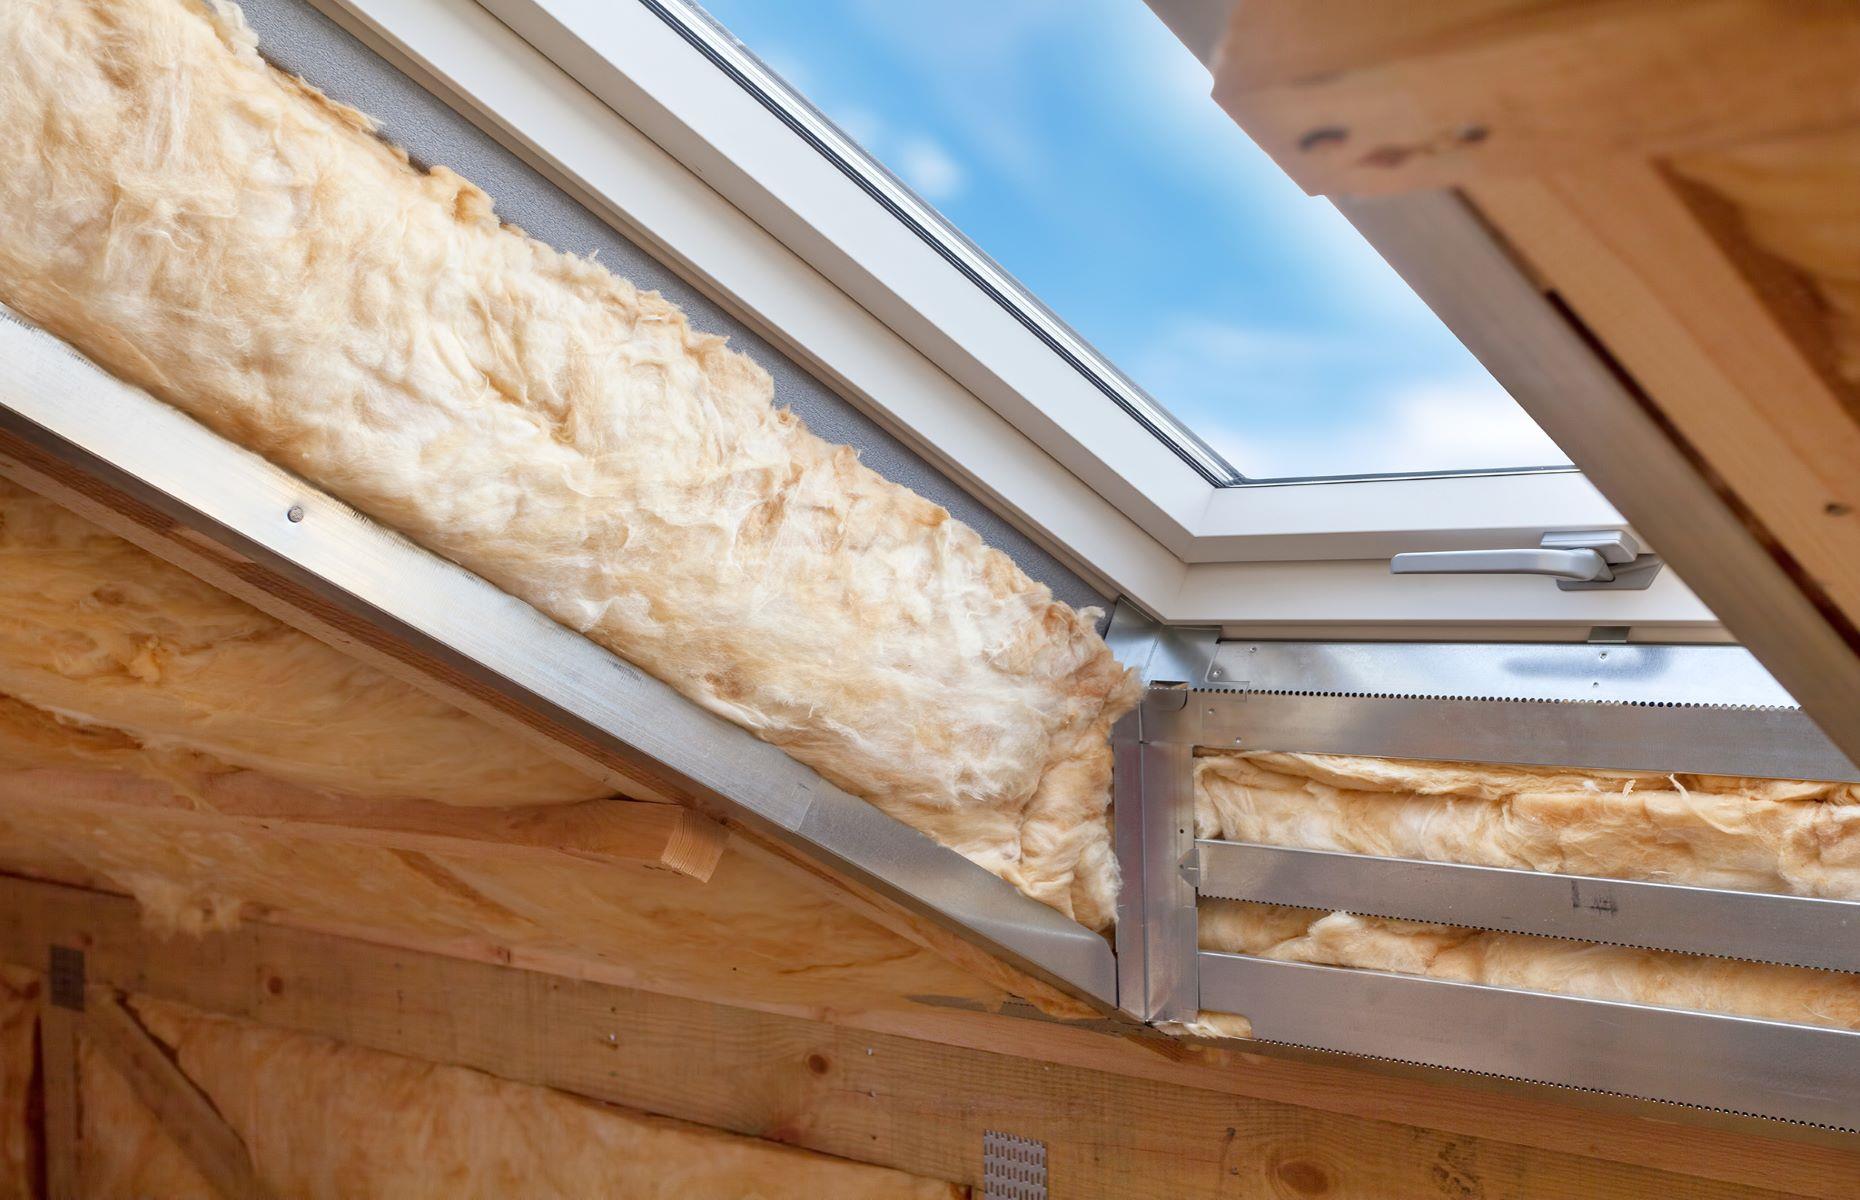 <p>Look after your roof, walls, windows and doors and they will pay you back by helping to <a href="https://www.loveproperty.com/gallerylist/117386/how-to-insulate-your-home-and-slash-energy-costs">reduce your energy costs</a>. Lay mineral wool insulation between and over the joists in your loft. If you want to convert the loft, insulate the roof instead with rigid insulation boards between the rafters. If you have cavity walls, ask an installer for a borescope inspection to check for insulation. Insulate solid walls on the inside with rigid insulation boards or on the outside by fixing a layer of insulation material beneath the render or cladding. Check doors, windows and floorboards for gaps and fill them.</p>